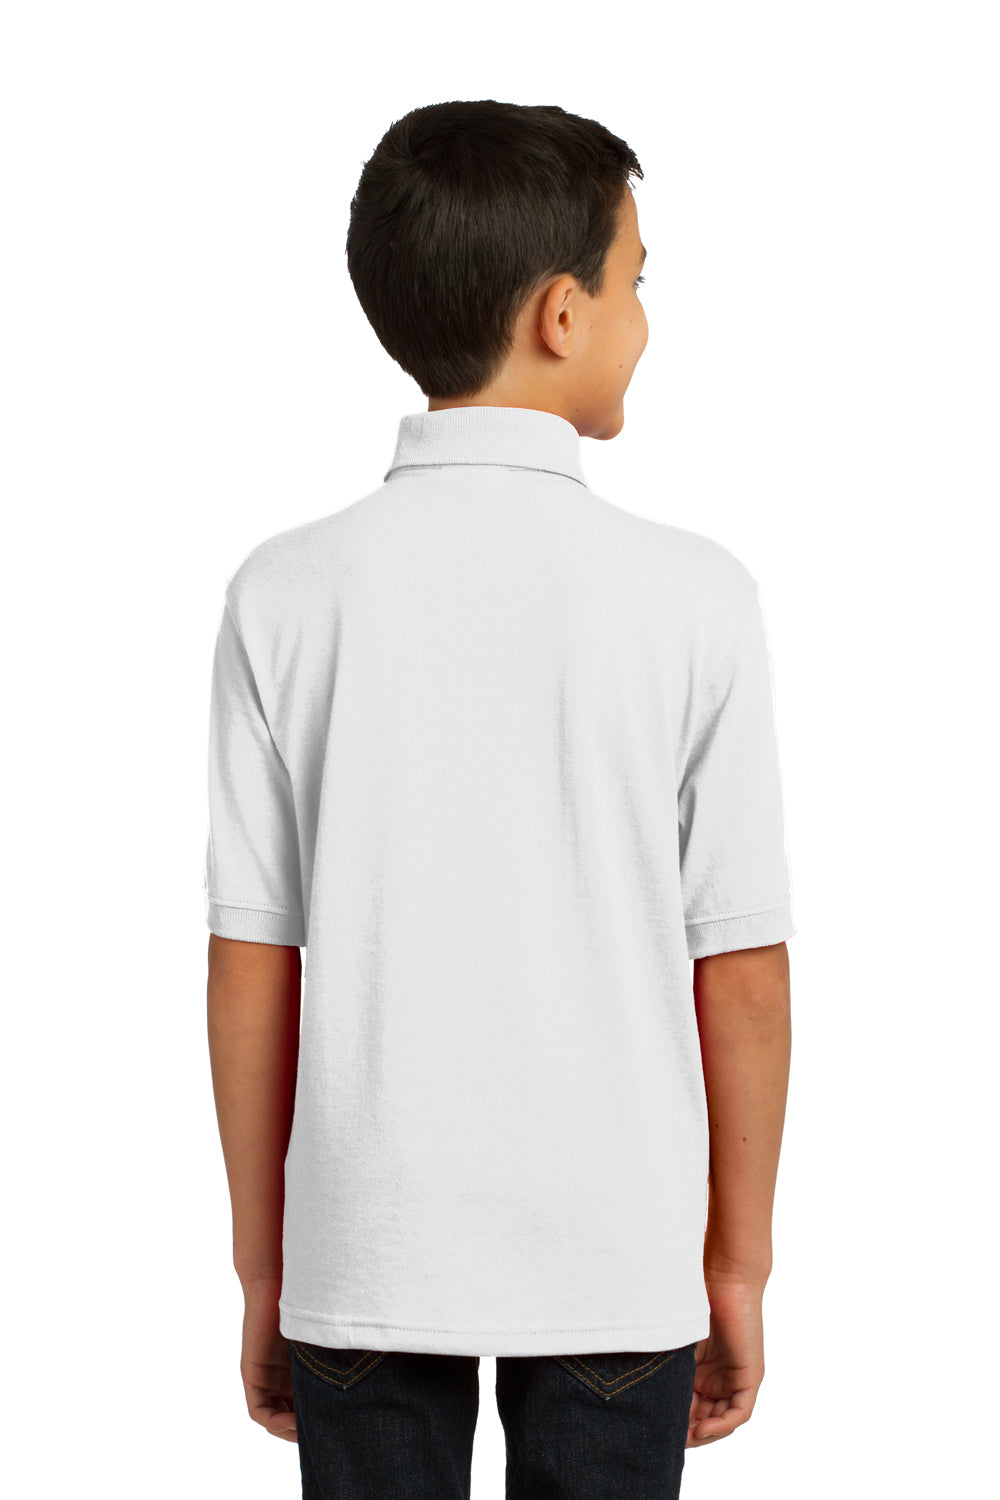 Port & Company KP55Y Youth Core Stain Resistant Short Sleeve Polo Shirt White Back